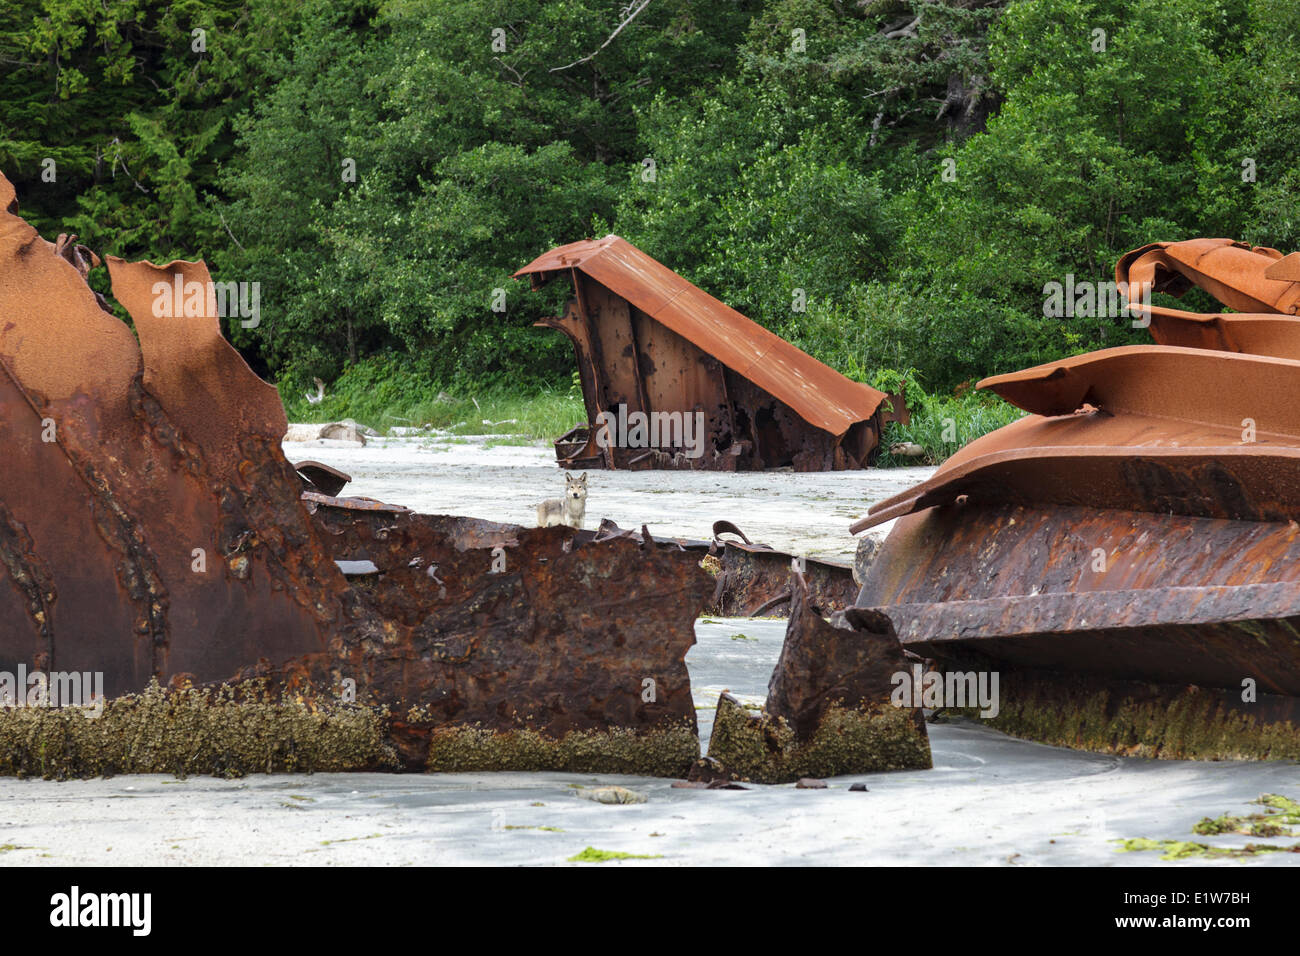 A lone Timber Wolf (Canus lupus) roams among the remains an old shipwreck at Louie Bay on Nootka Island British Columbia Canada. Stock Photo